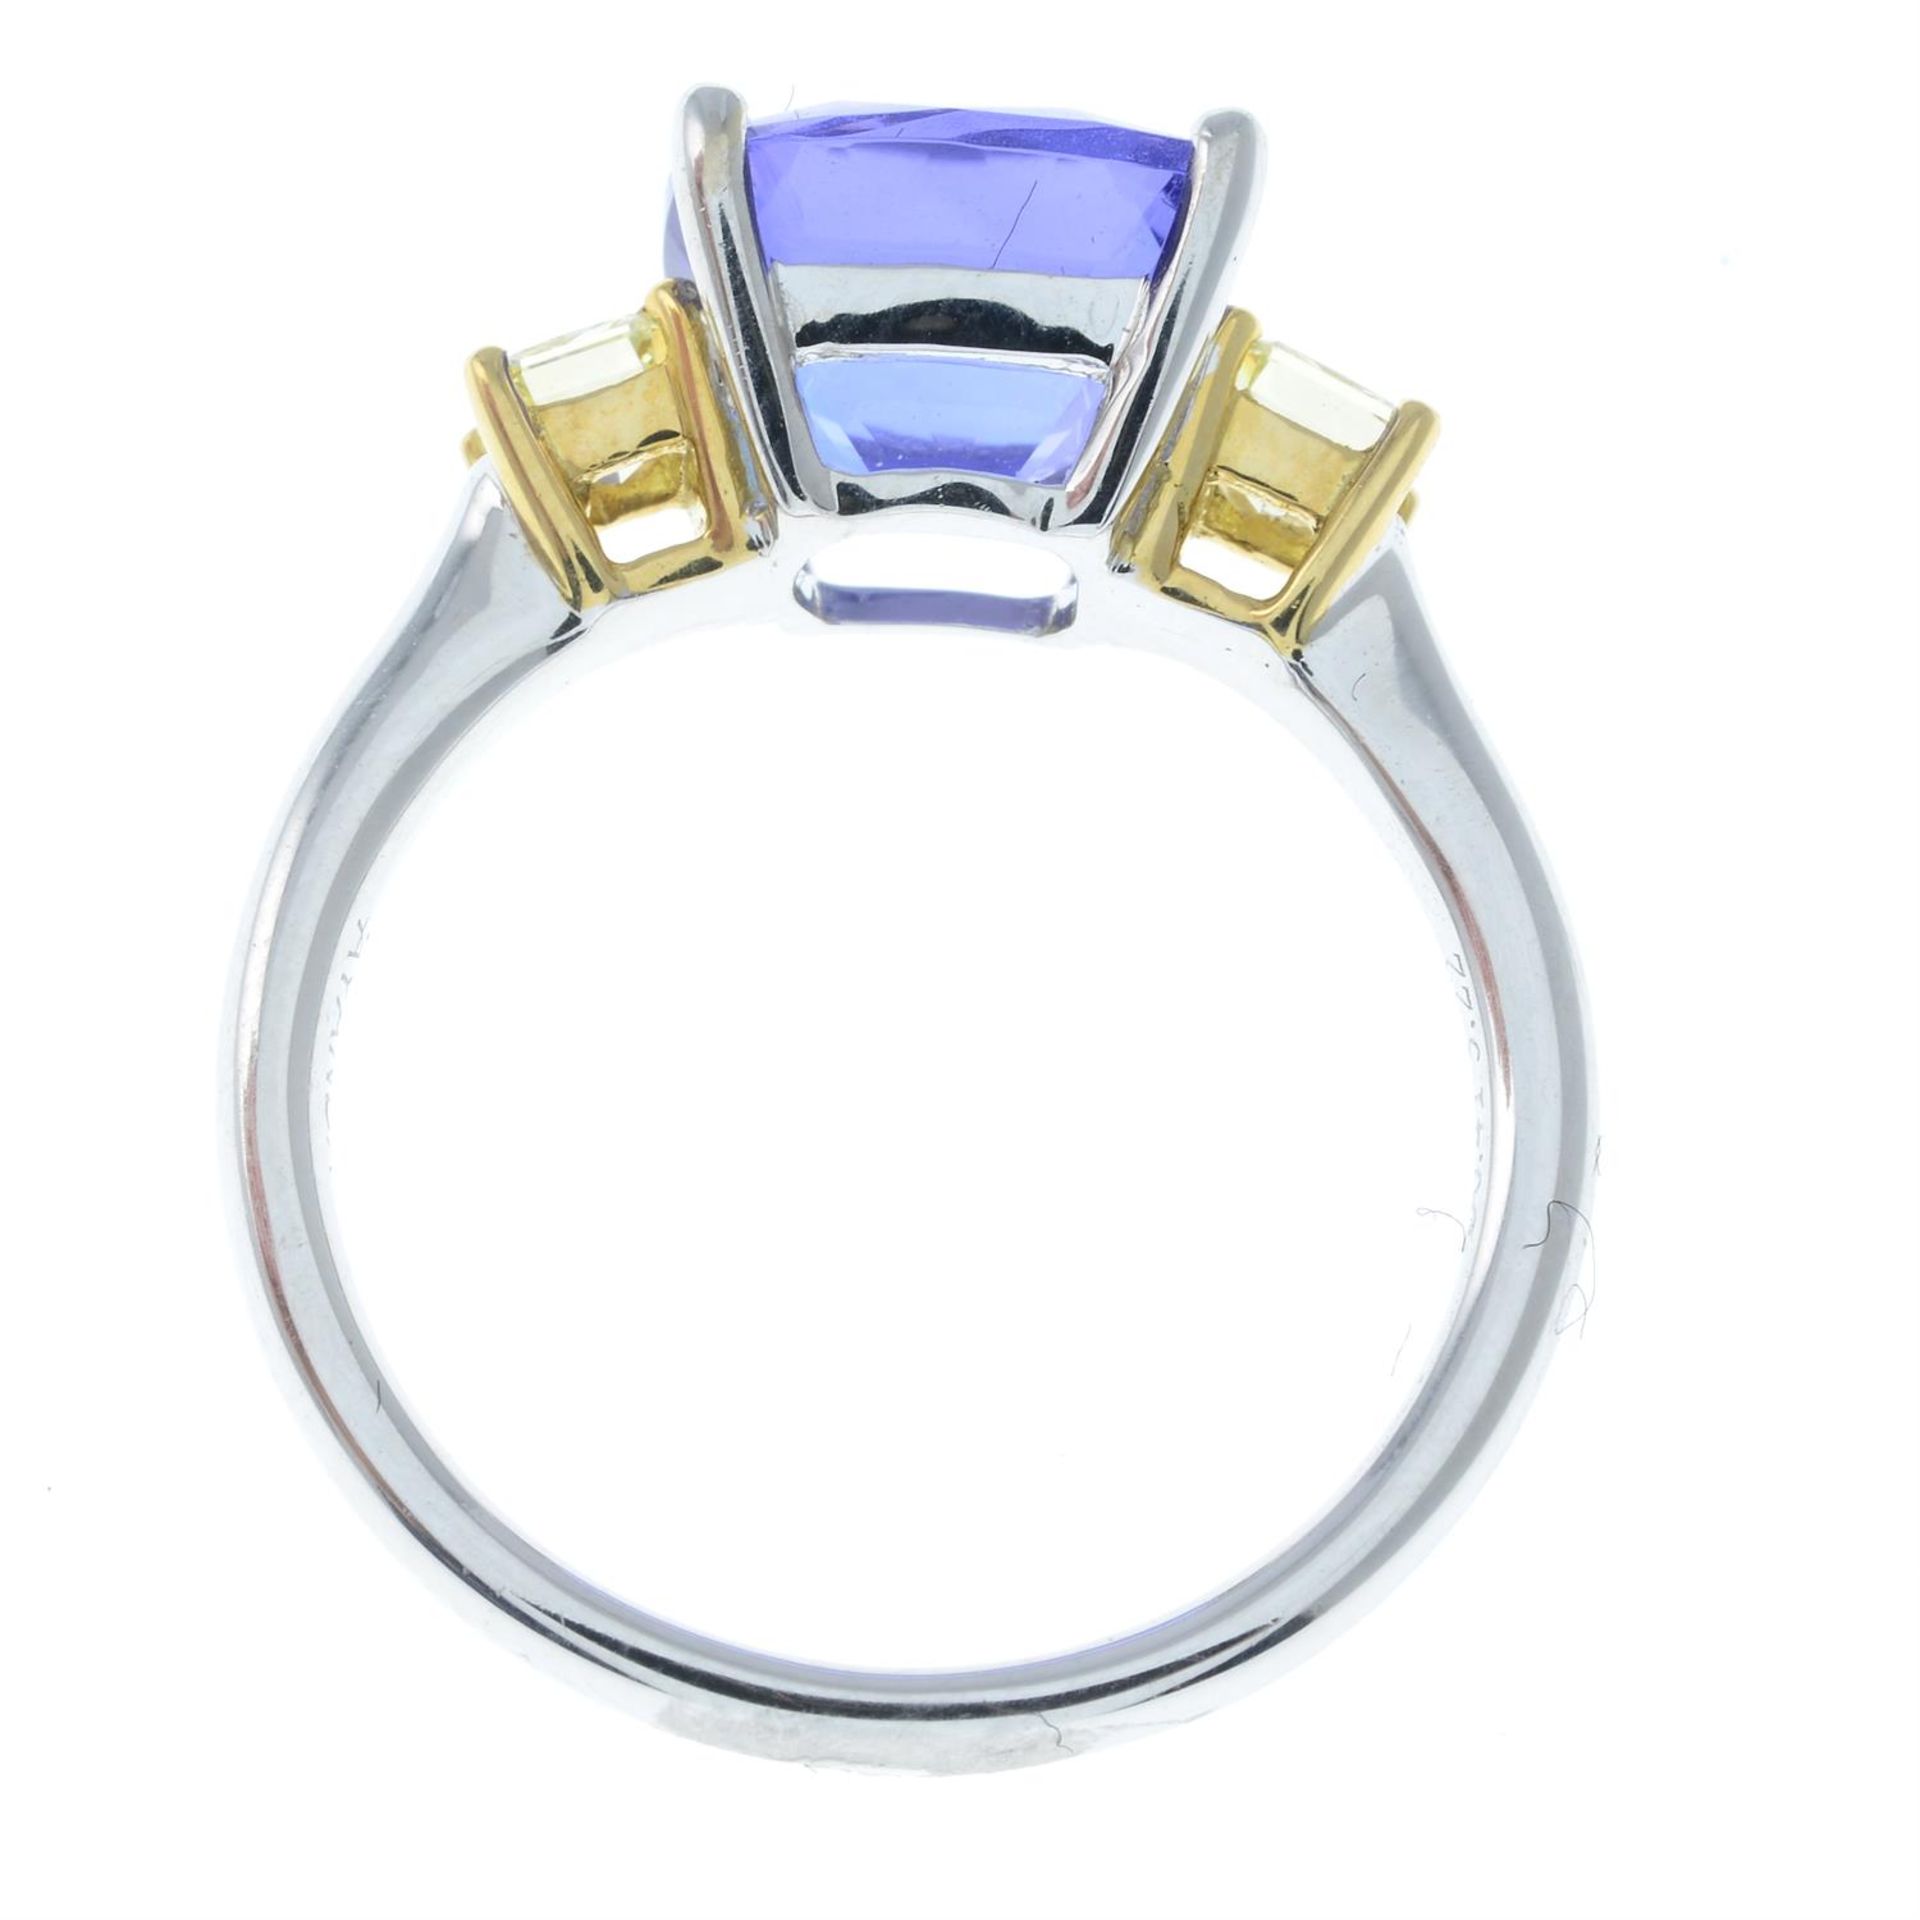 A tanzanite and square-cut 'fancy light' yellow diamond ring. - Image 2 of 2